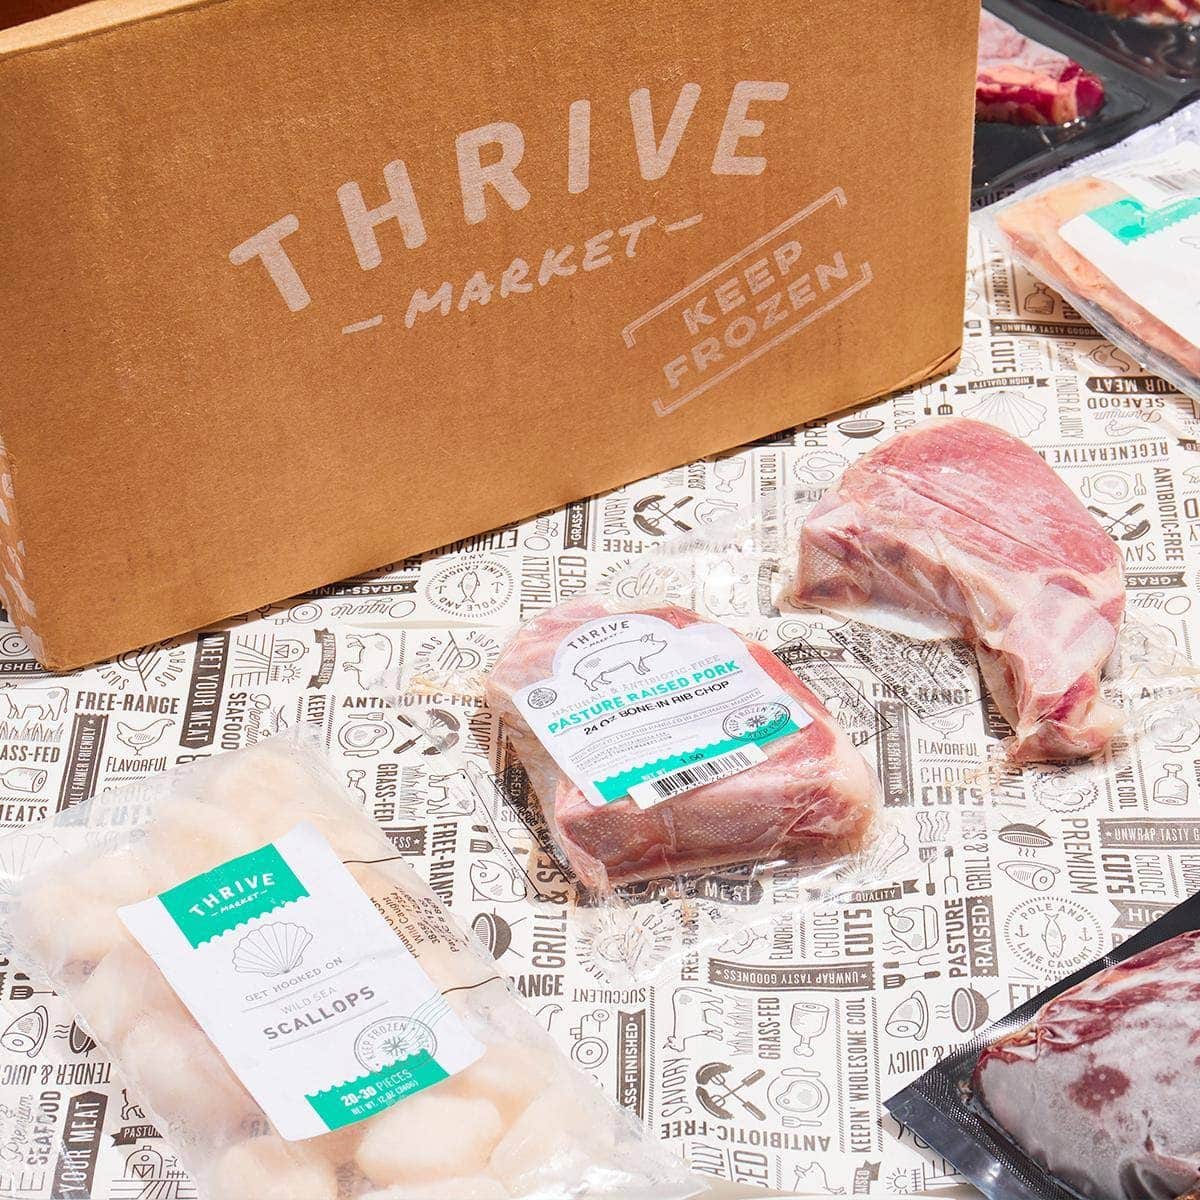 Thrive Market Review - Must Read This Before Buying